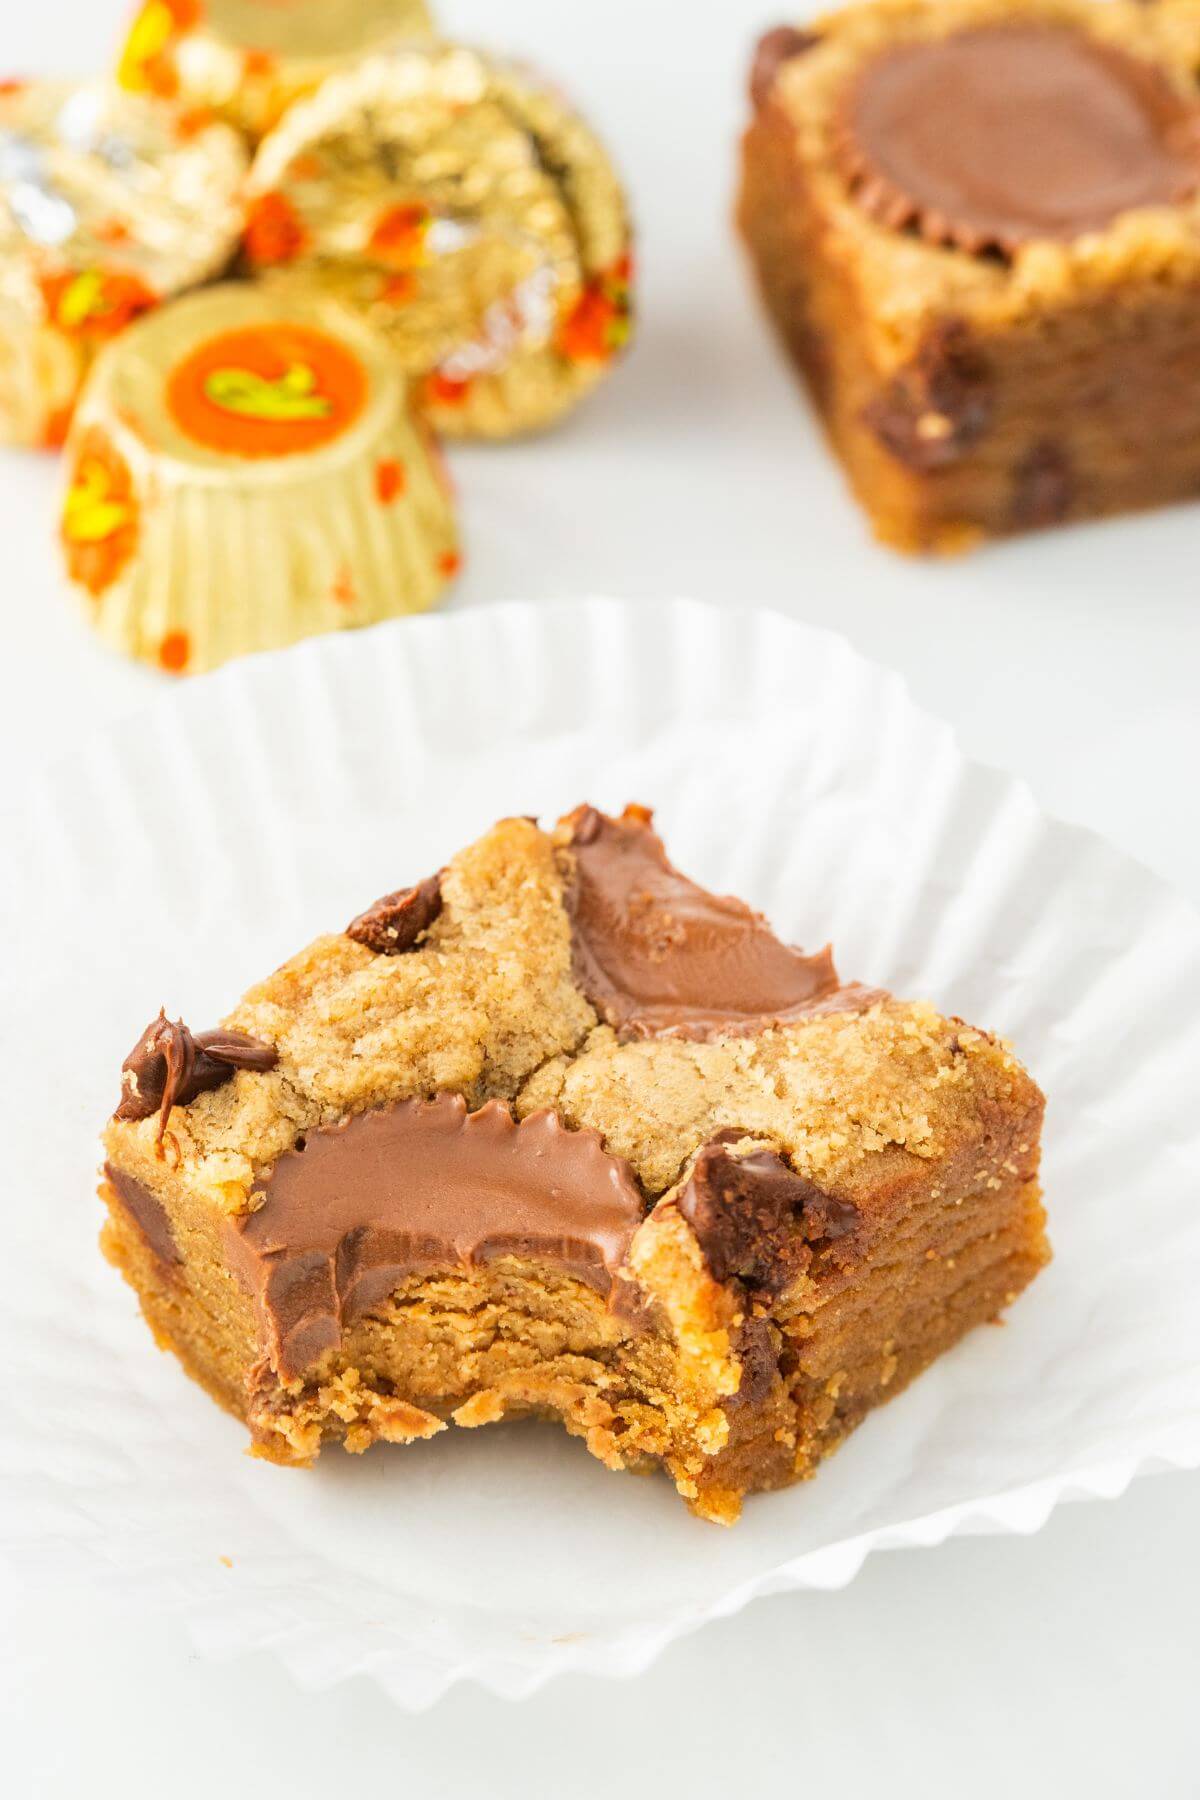 A blondie with a bite removed is in front of another blondie and Reese's peanut butter cups.